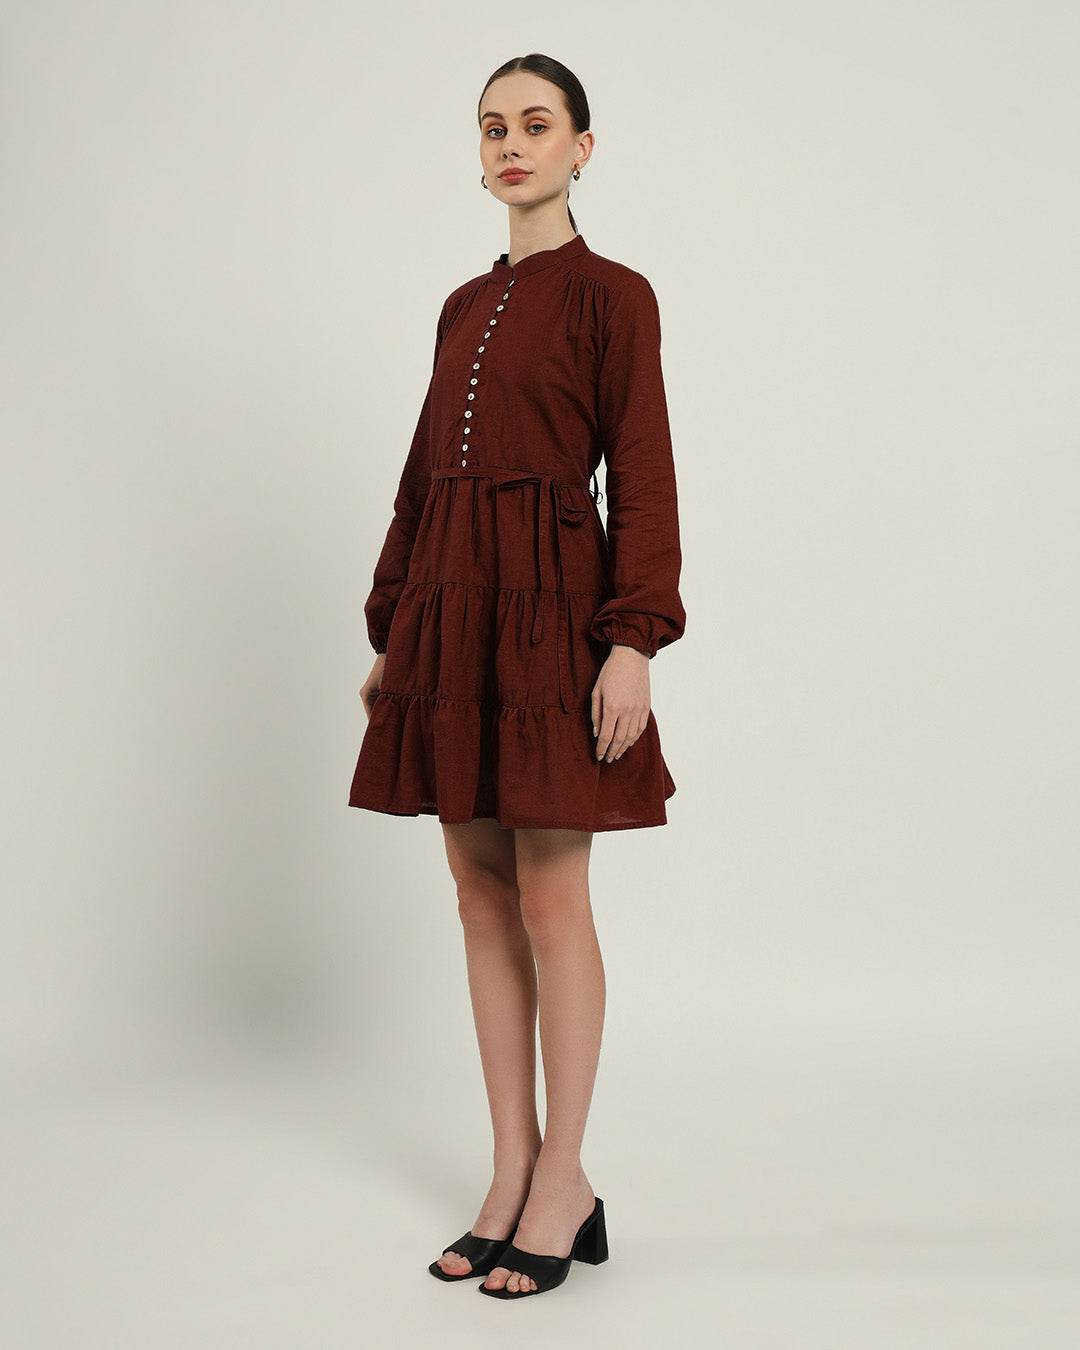 The Ely Rouge Dress